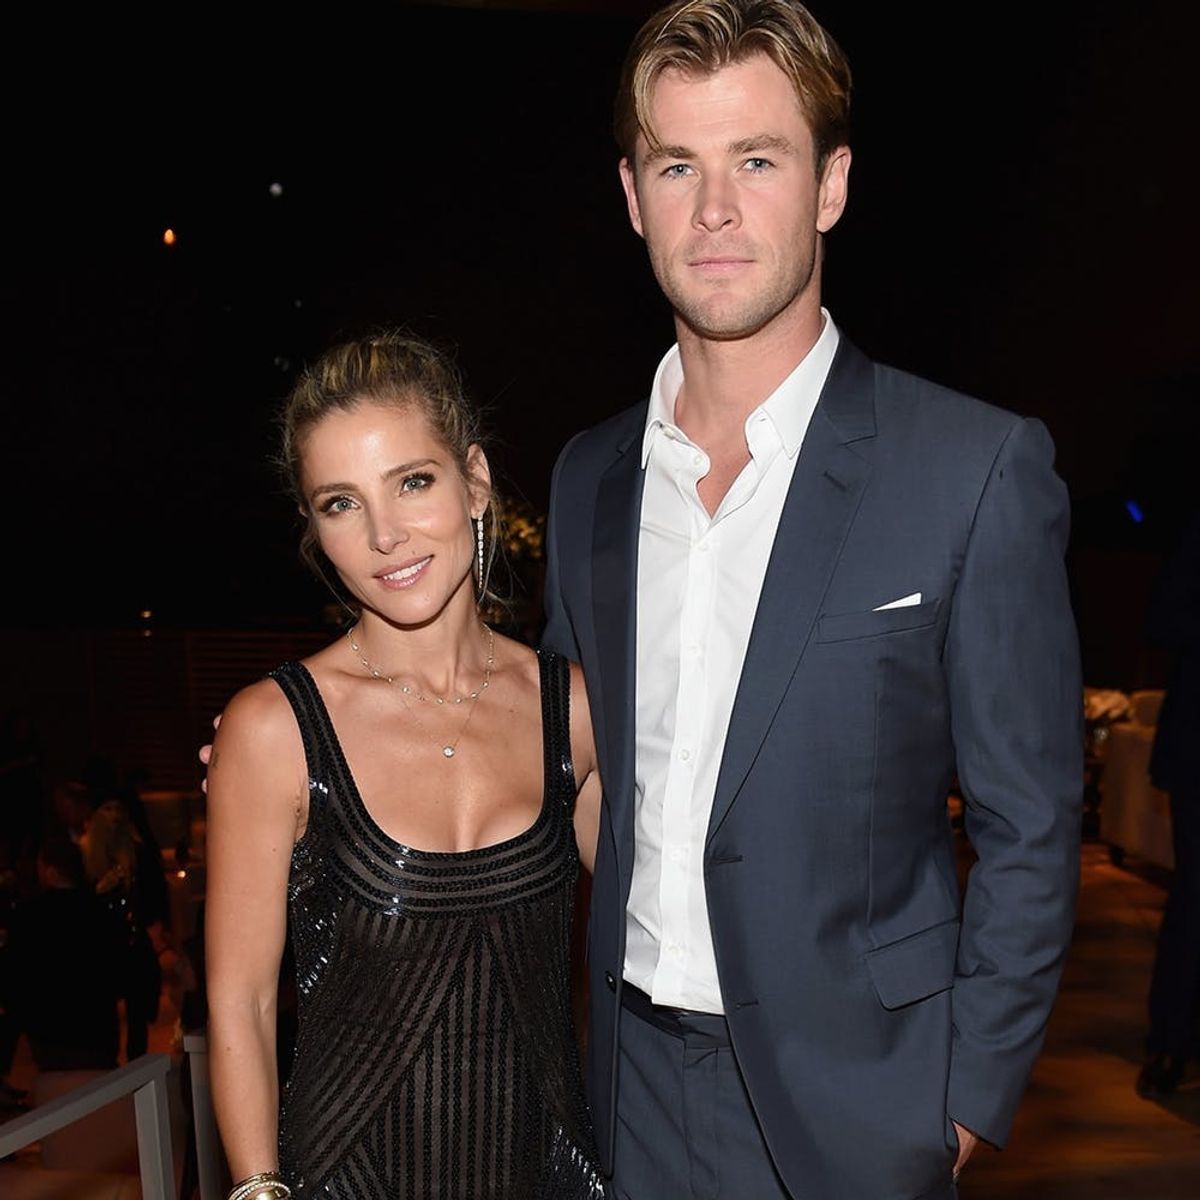 Chris Hemsworth’s Wife Elsa Pataky Just Invented a Genius Stroller Workout